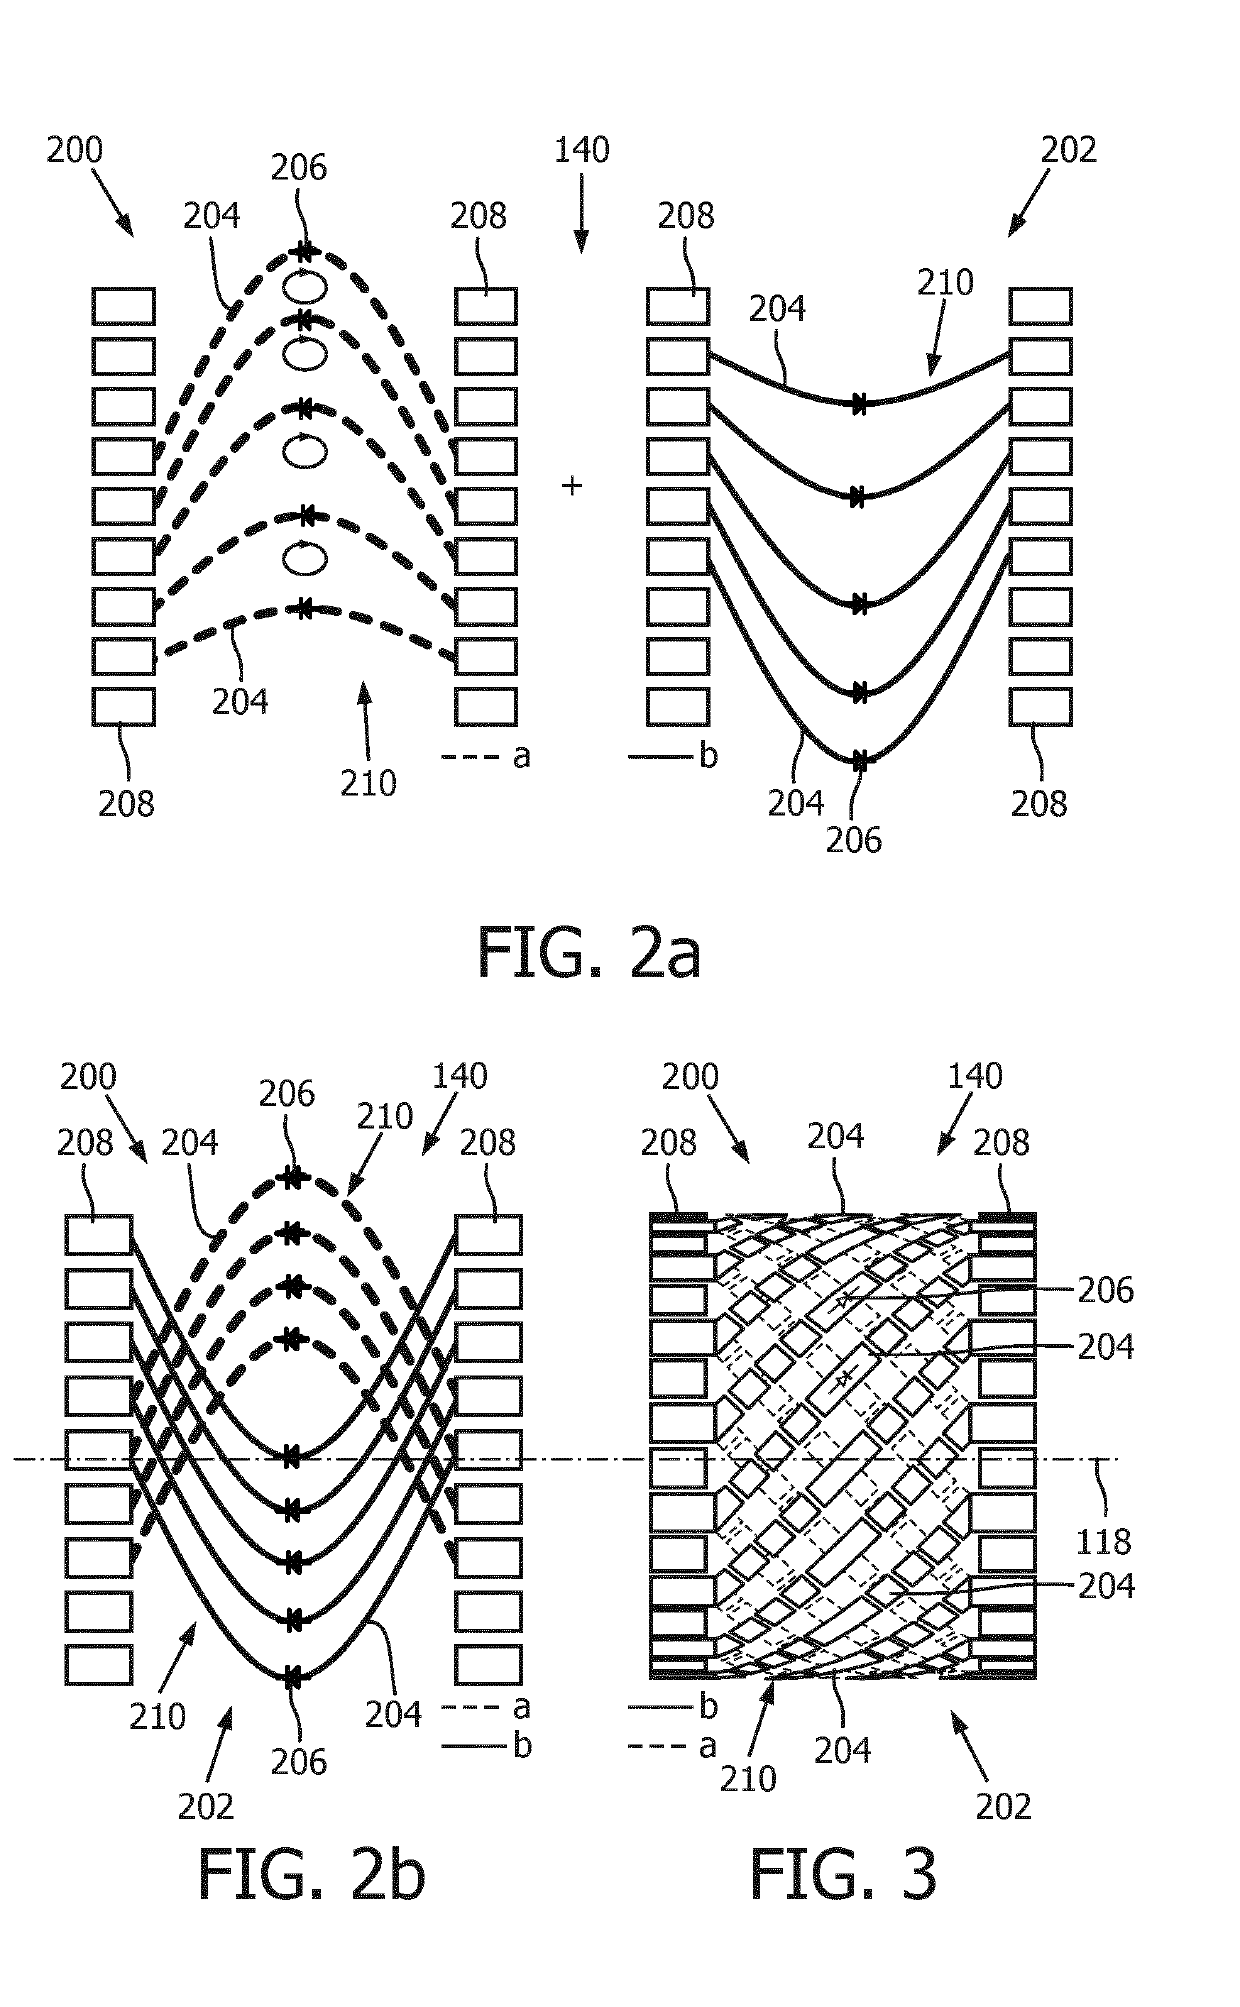 RF coil device and RF shield device for different MRI modes